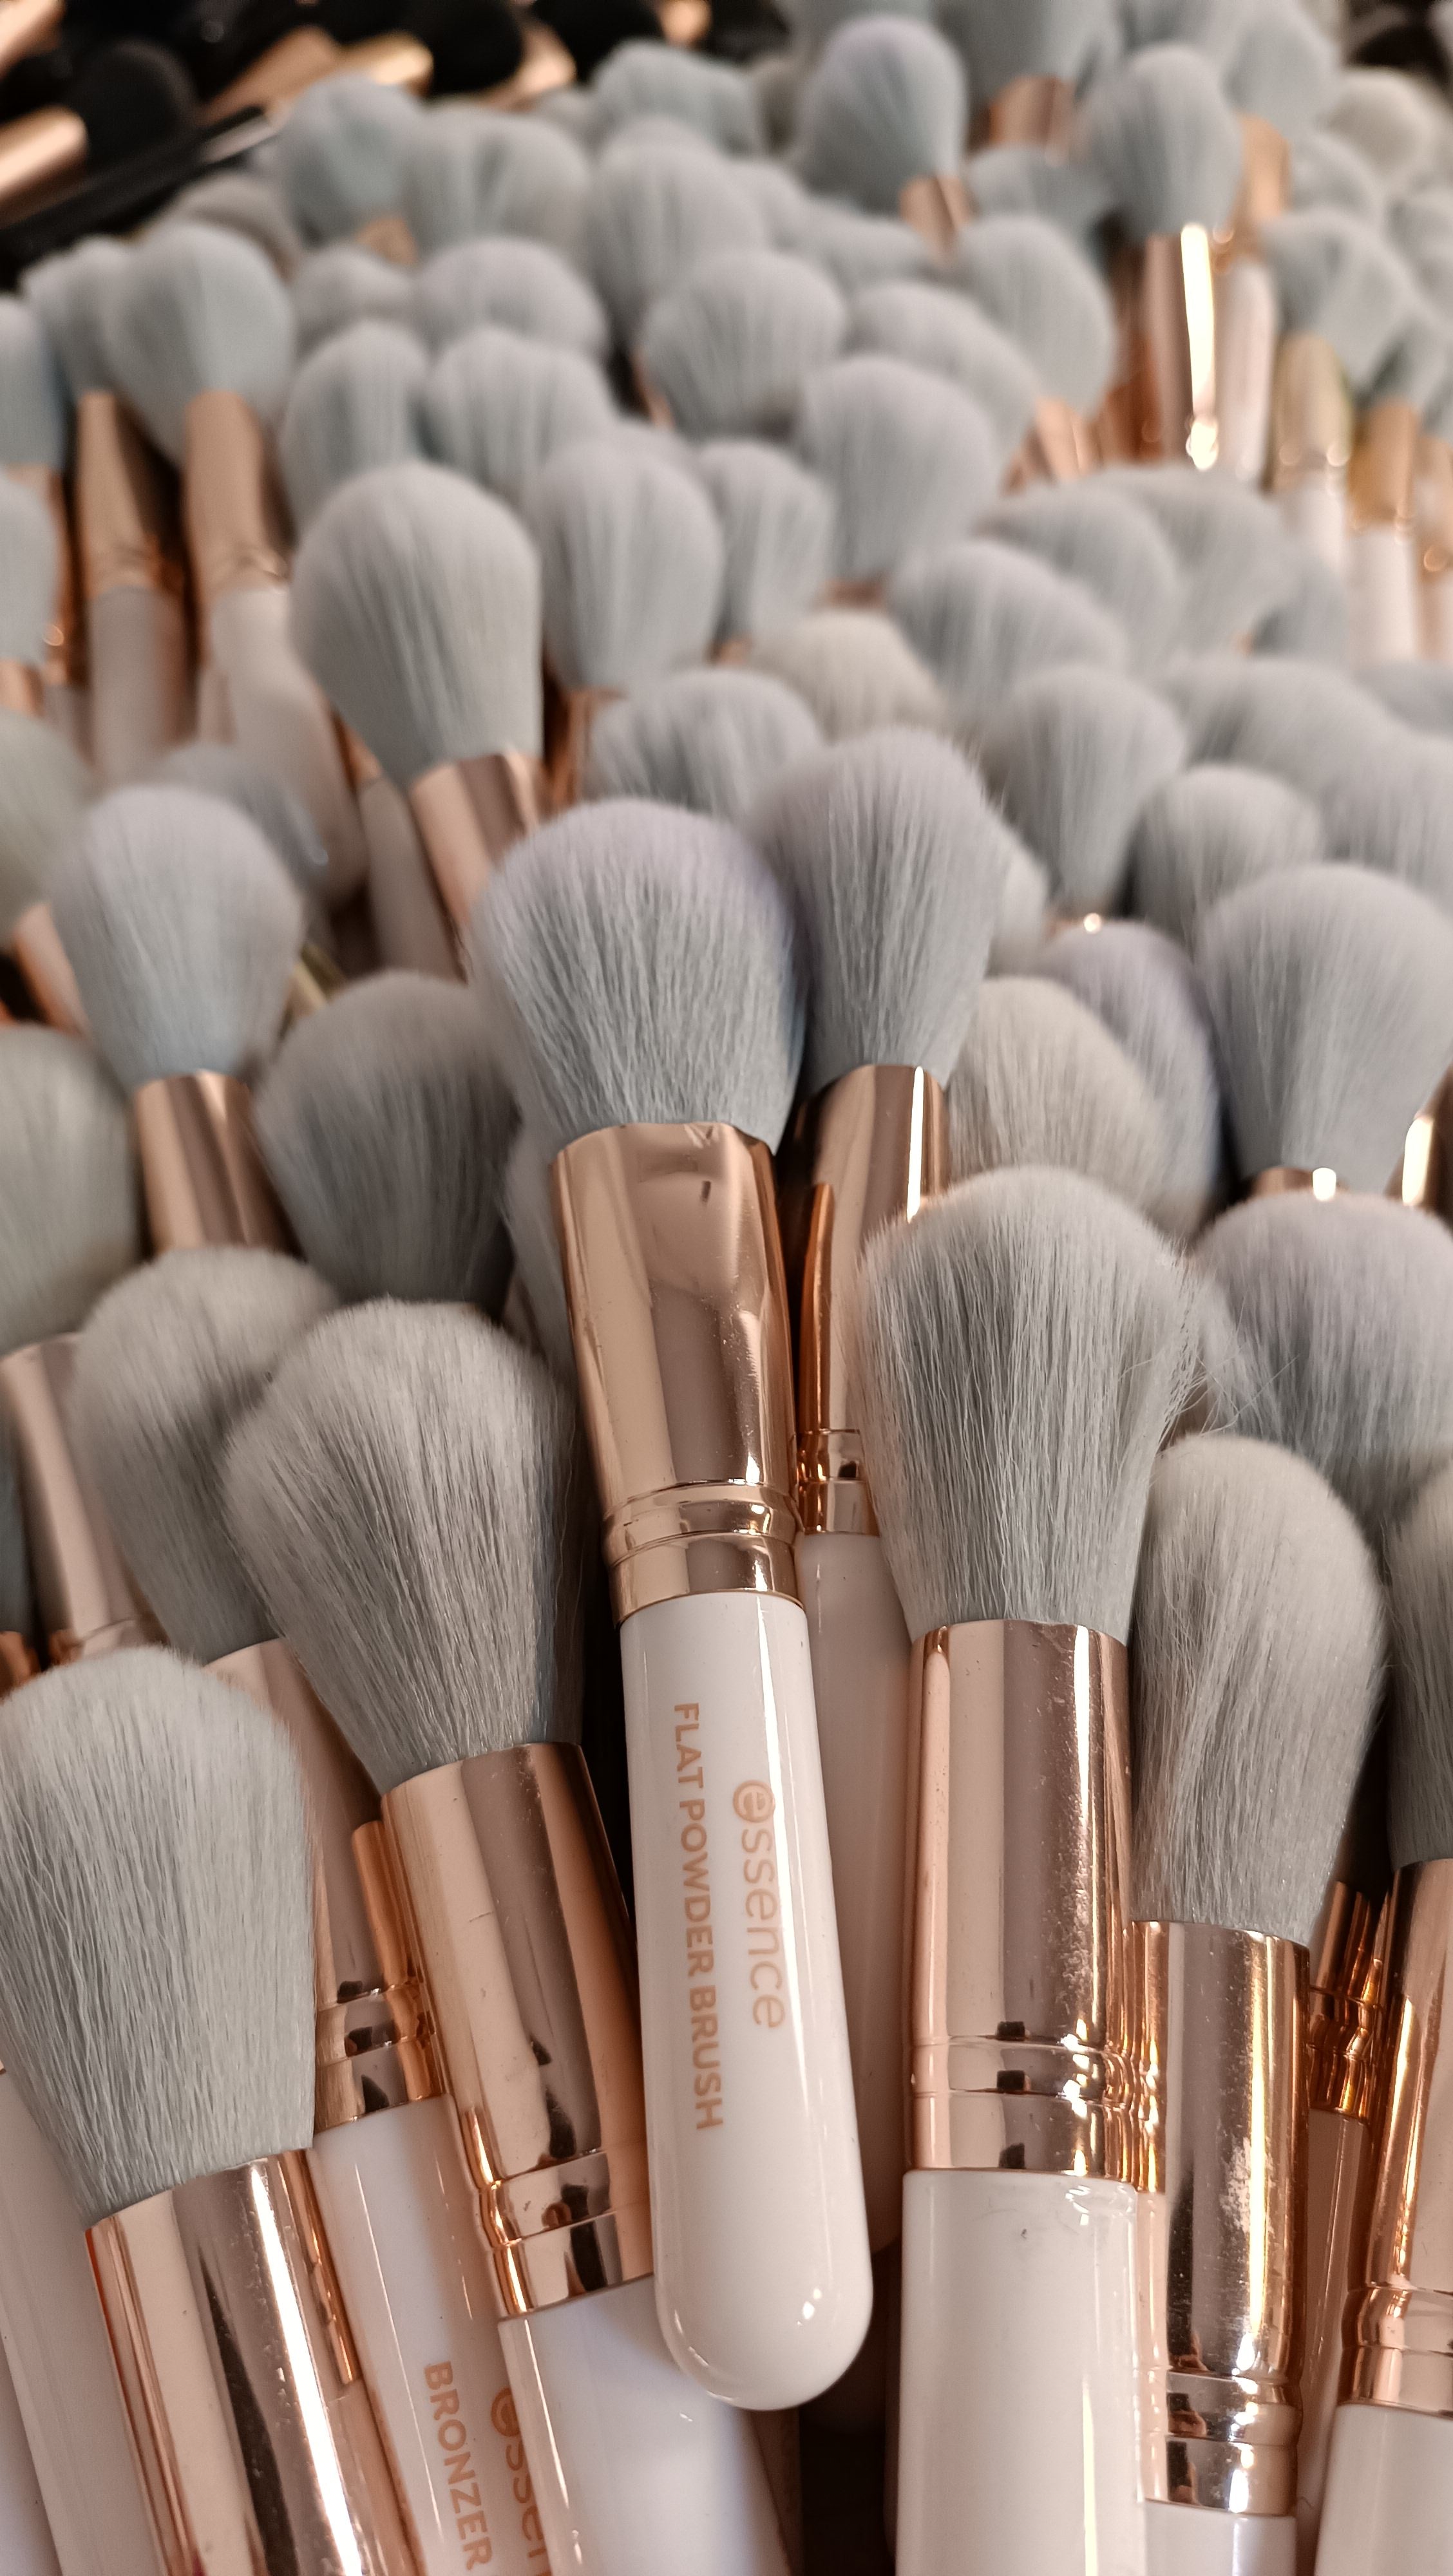 Makeup Brushes Mix In Kgs